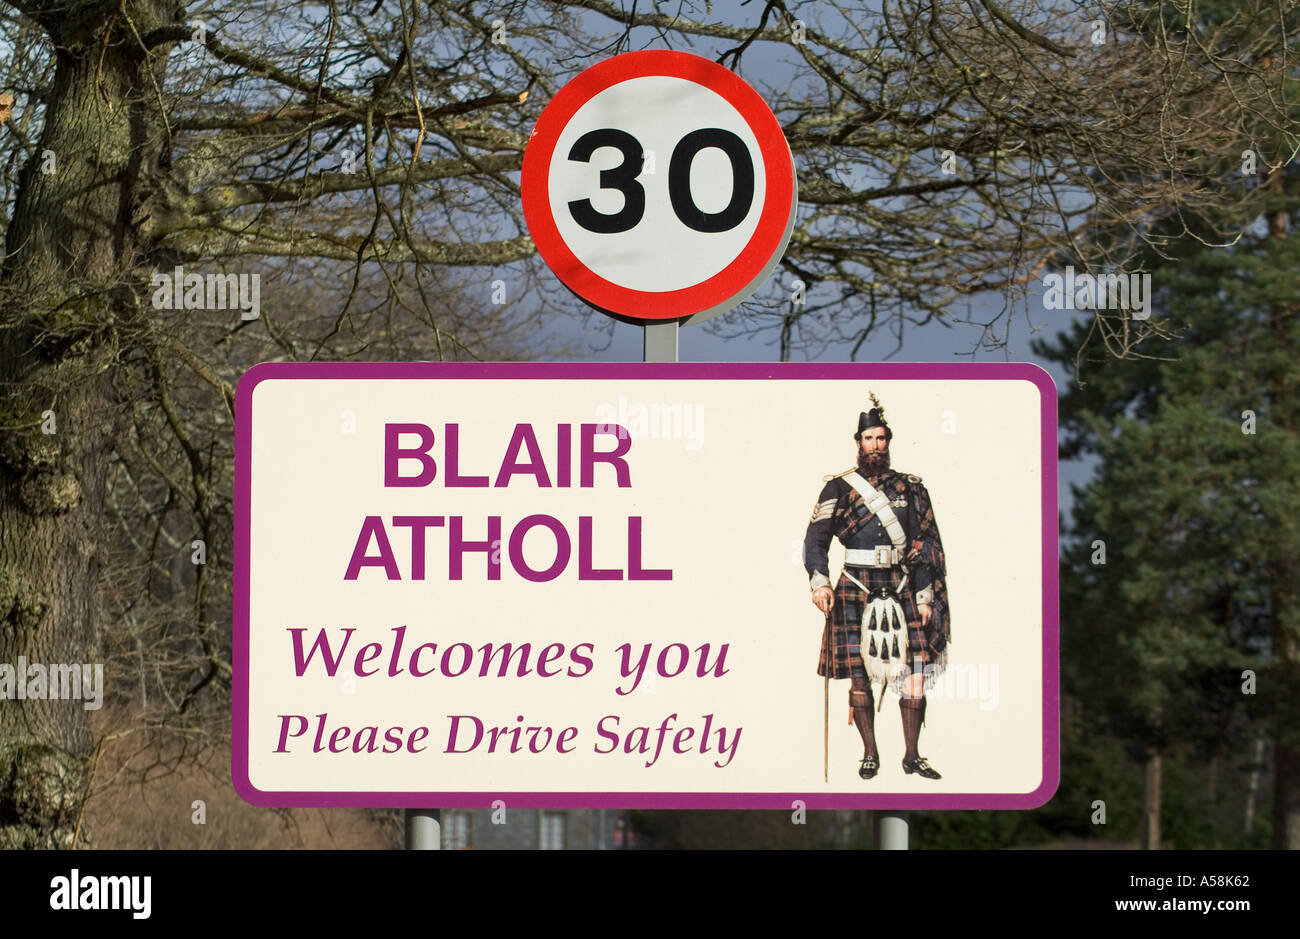 dh  BLAIR ATHOLL PERTHSHIRE Welcome please drive safely sign 30 mph speed limit highlands roadsign uk village road Stock Photo